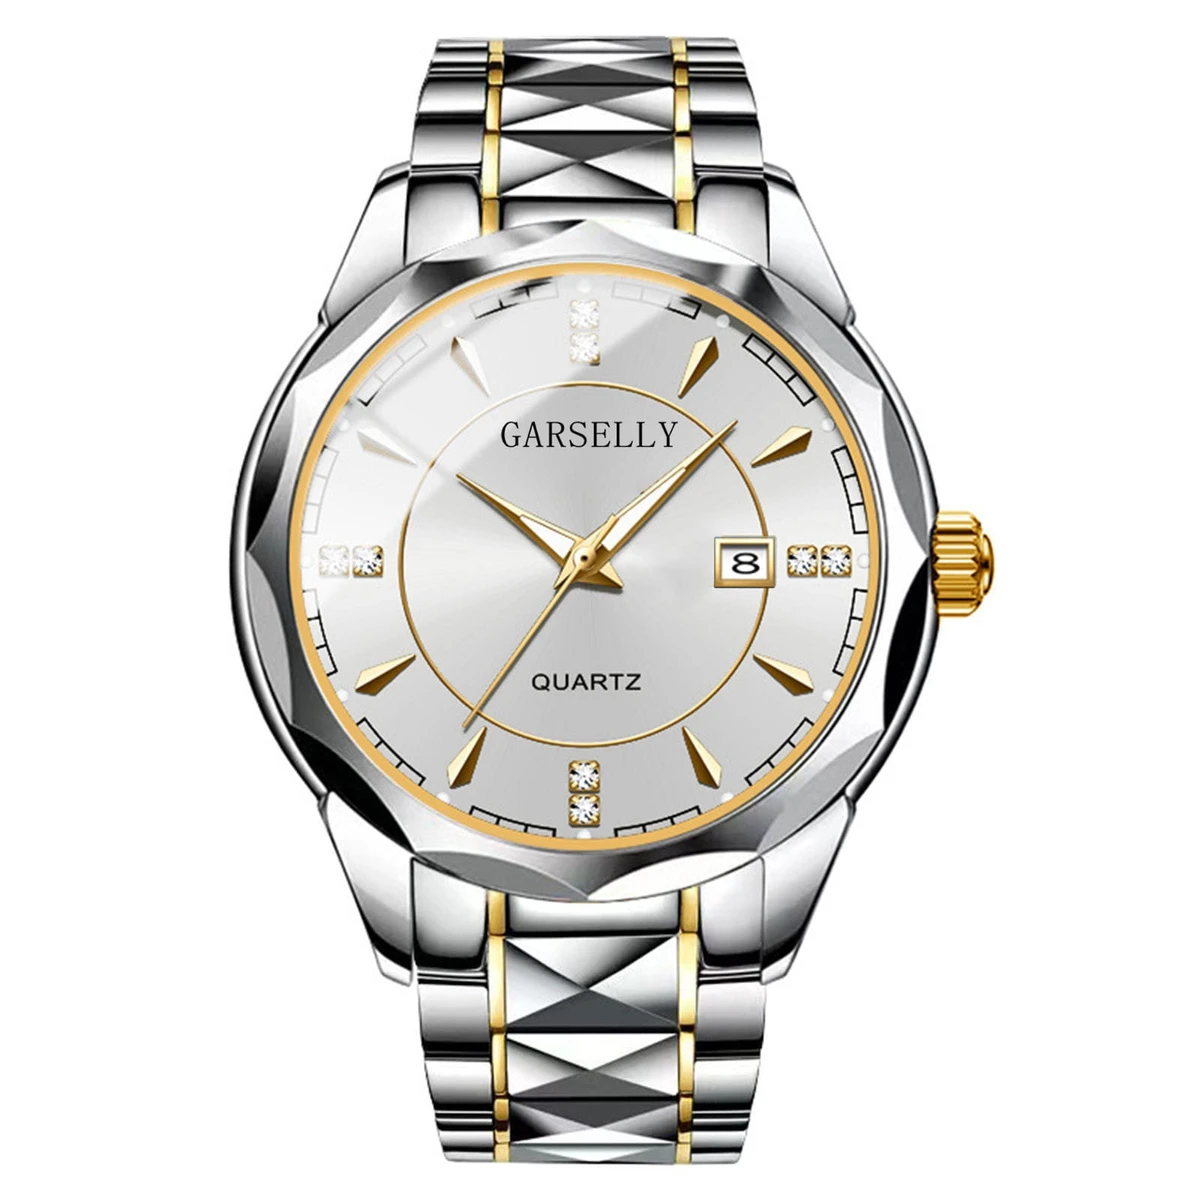 GARSELLY - Luxury Man Wristwatch Waterproof Watch for Men Stainless Steel Men's Watches High Quality+Box-Silver&White